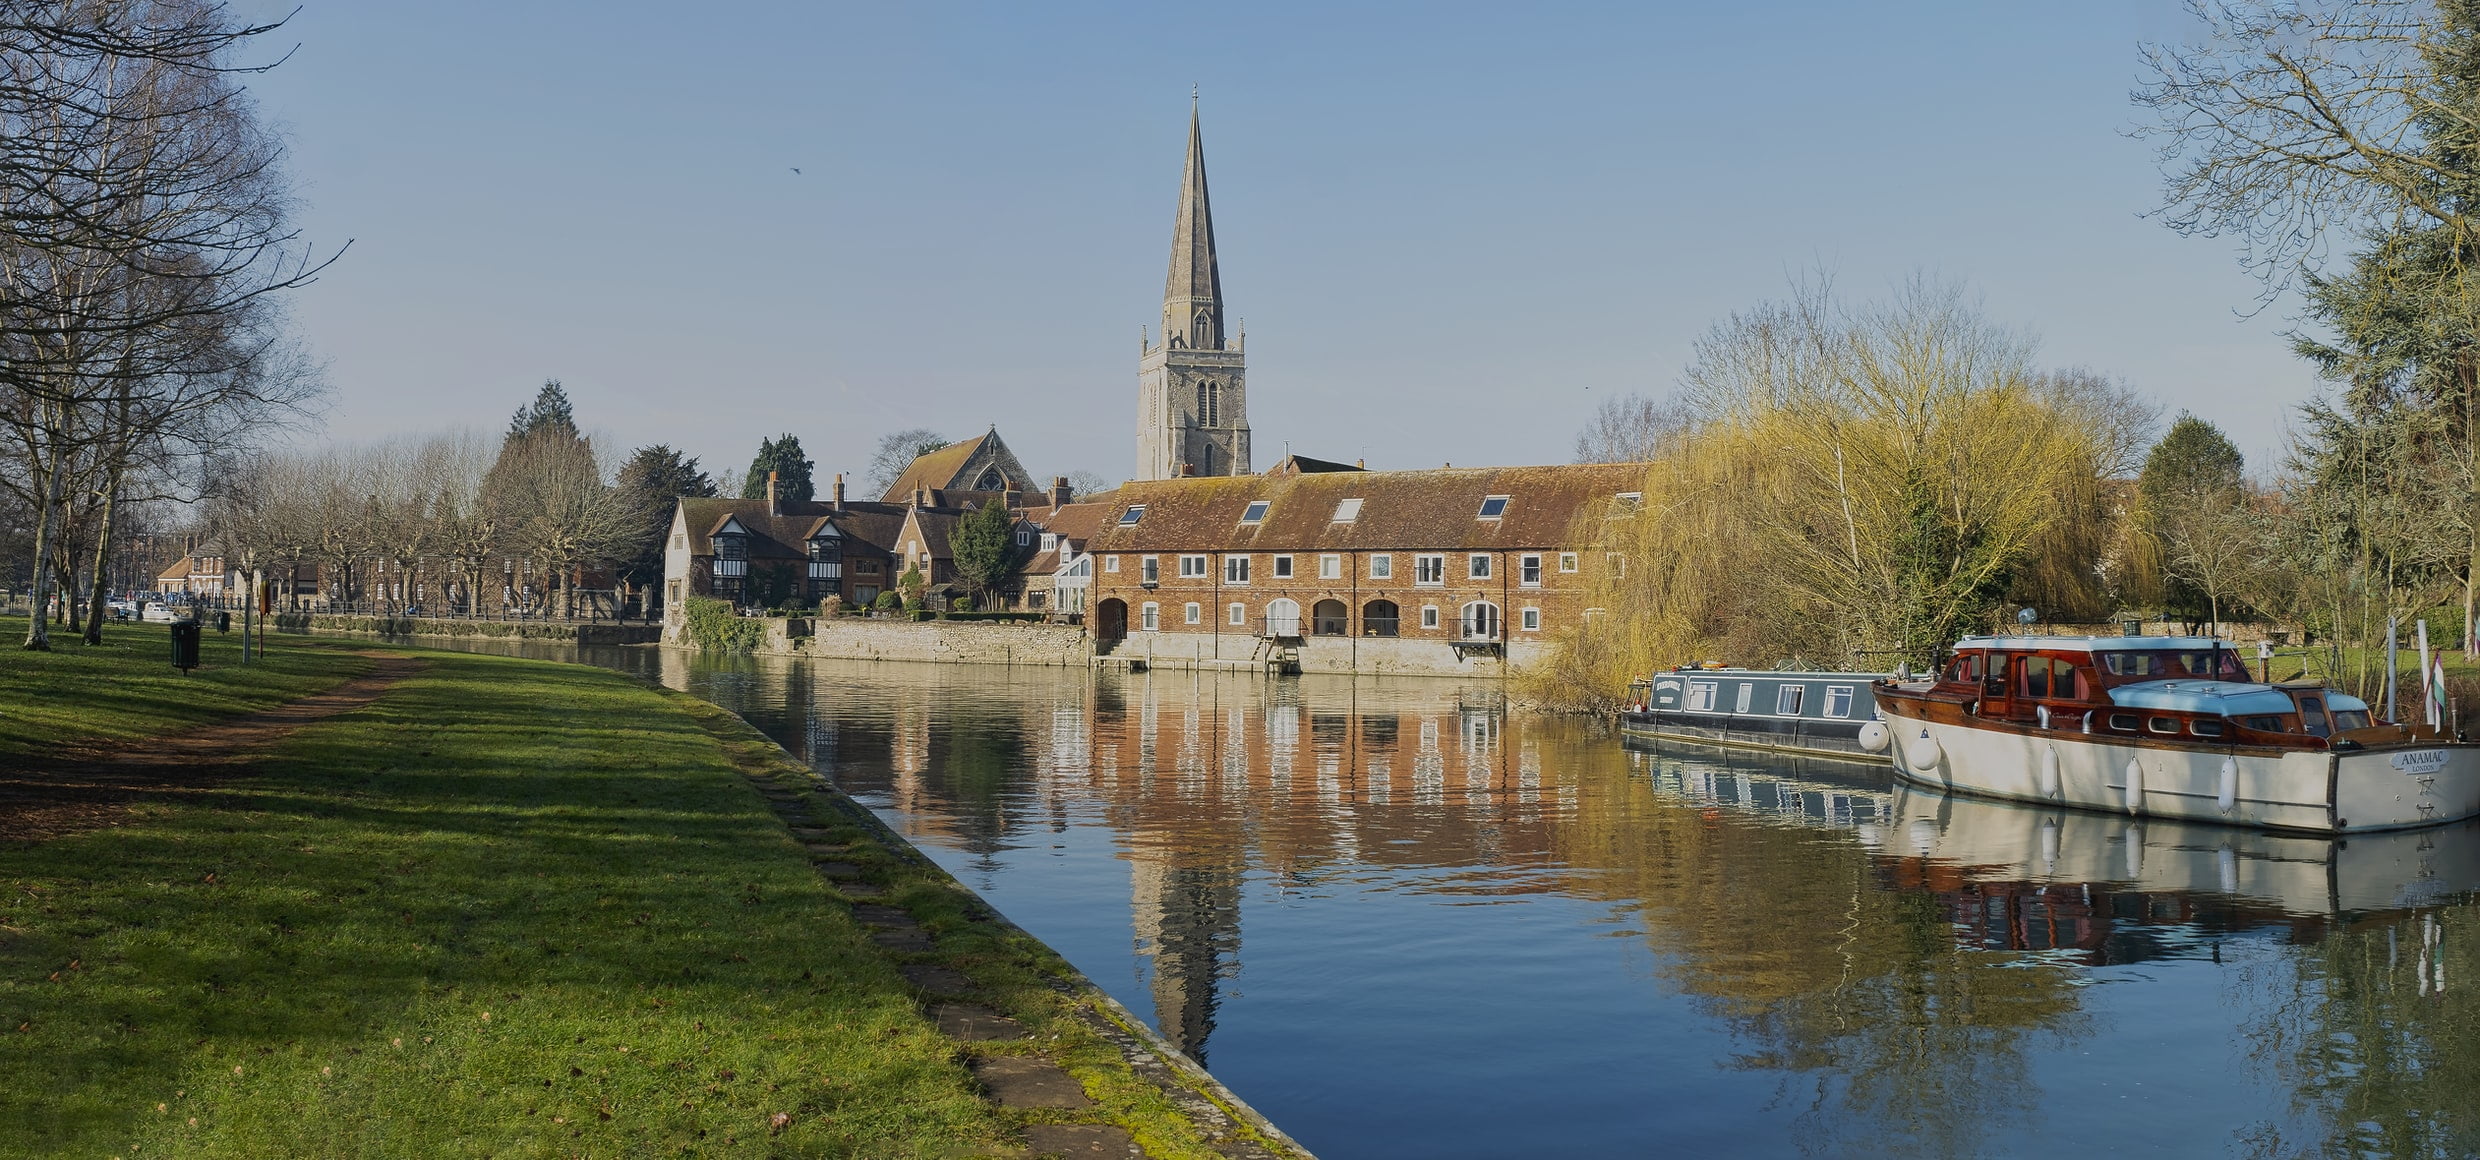 Abingdon-on-Thames, an RJS Waste Management favourite for Oxfordshire Day